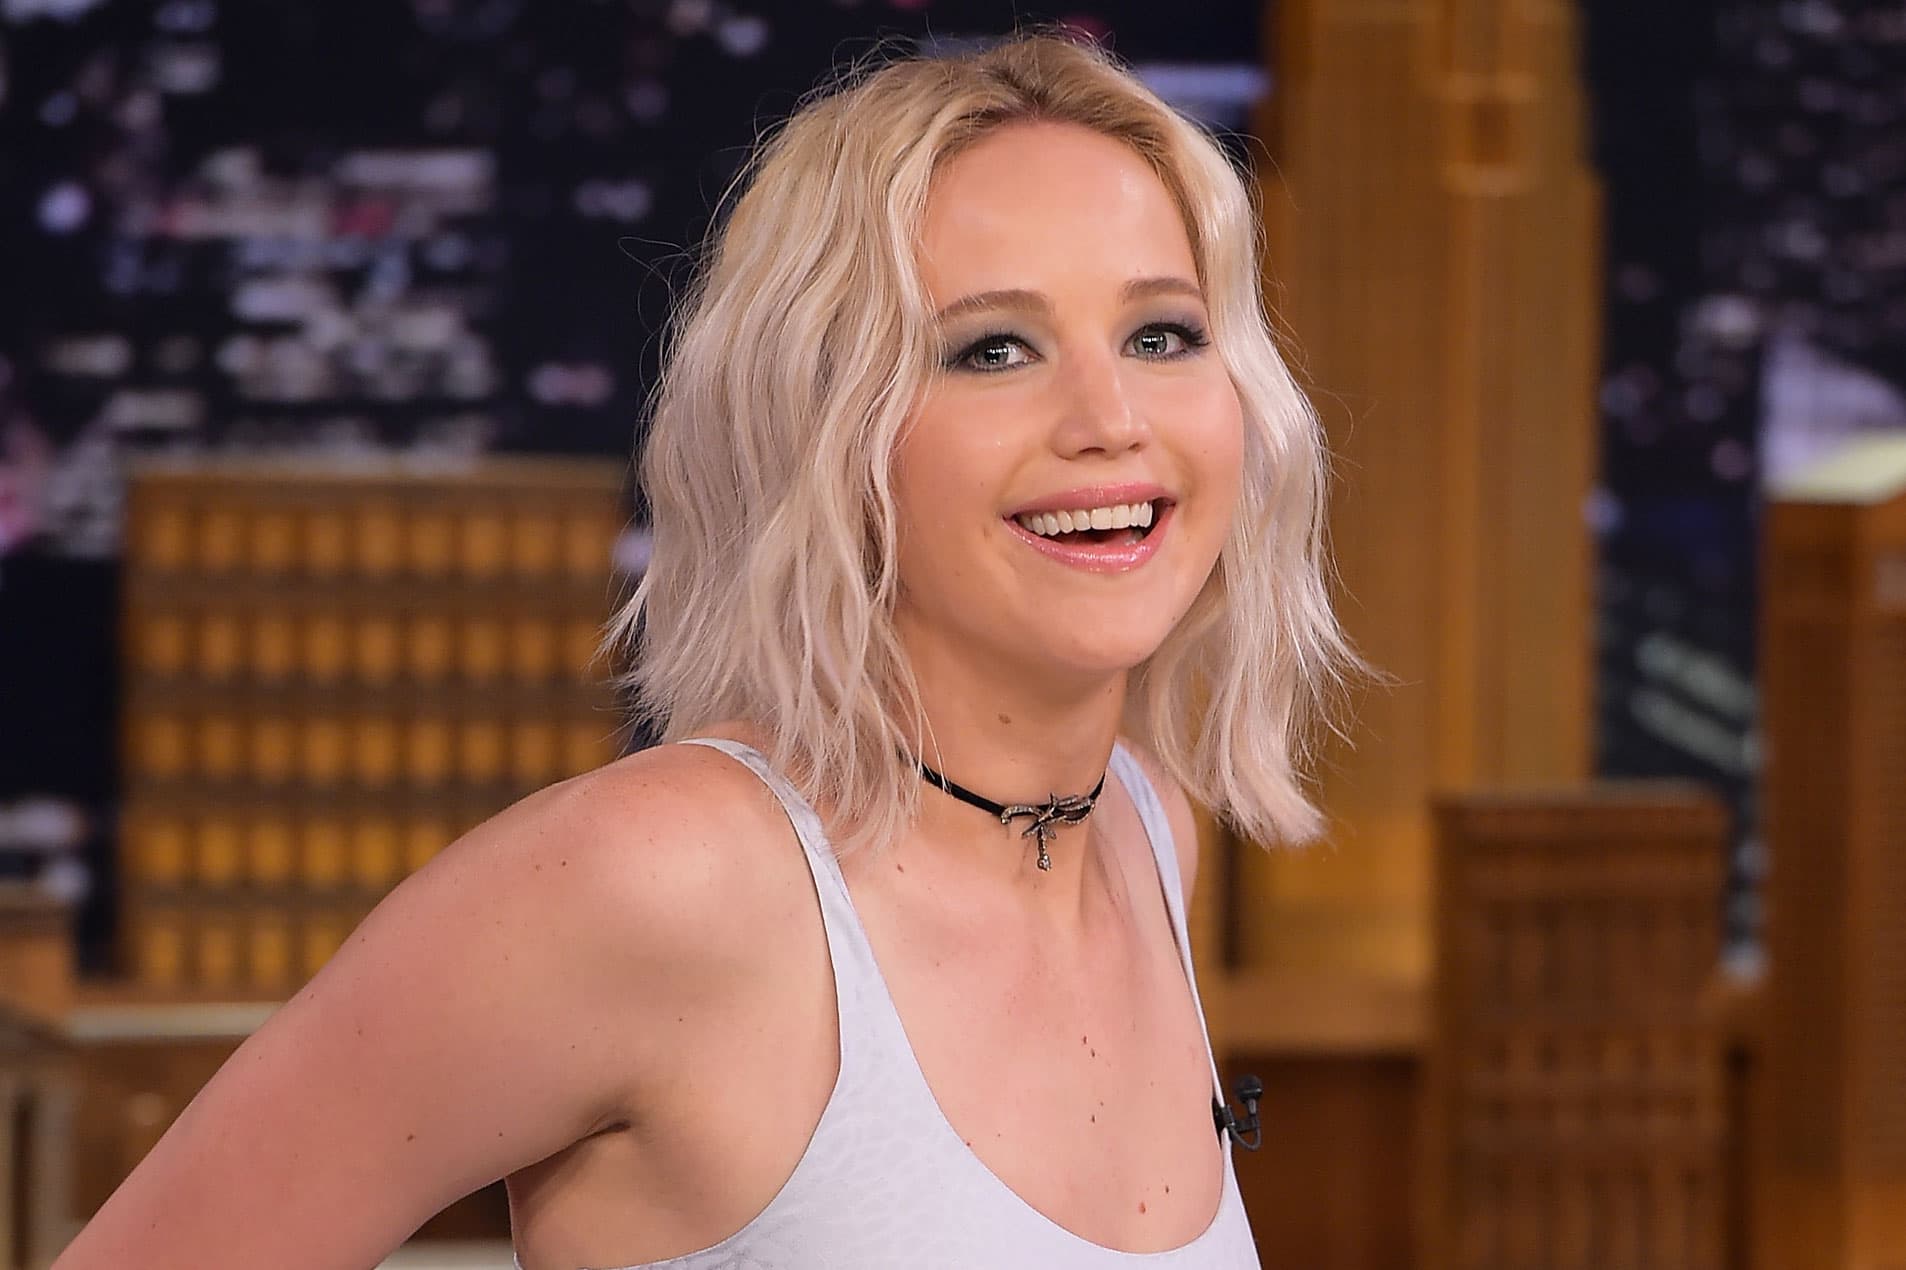 Jennifer Lawrence got high on set to nail this role